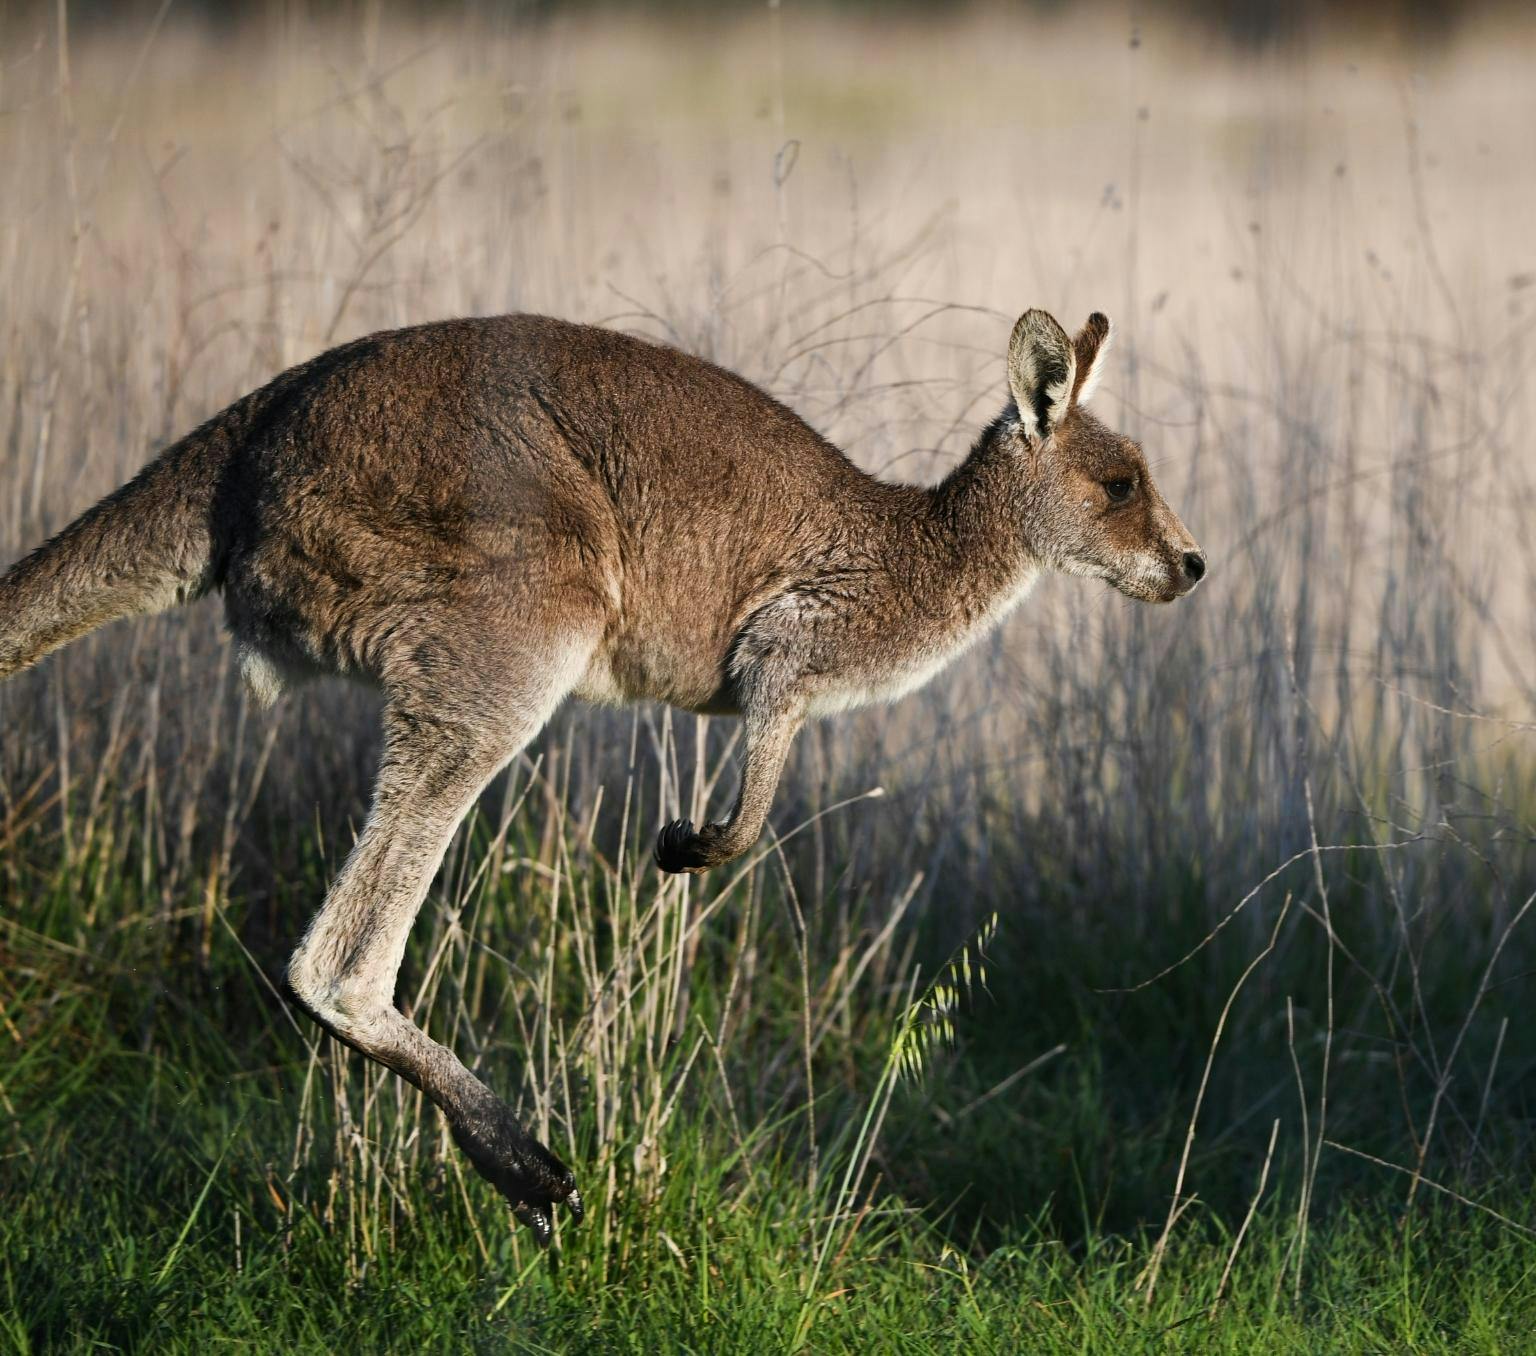 A kangaroo bouncing in the air. There are crops in the background and grass in the foreground.